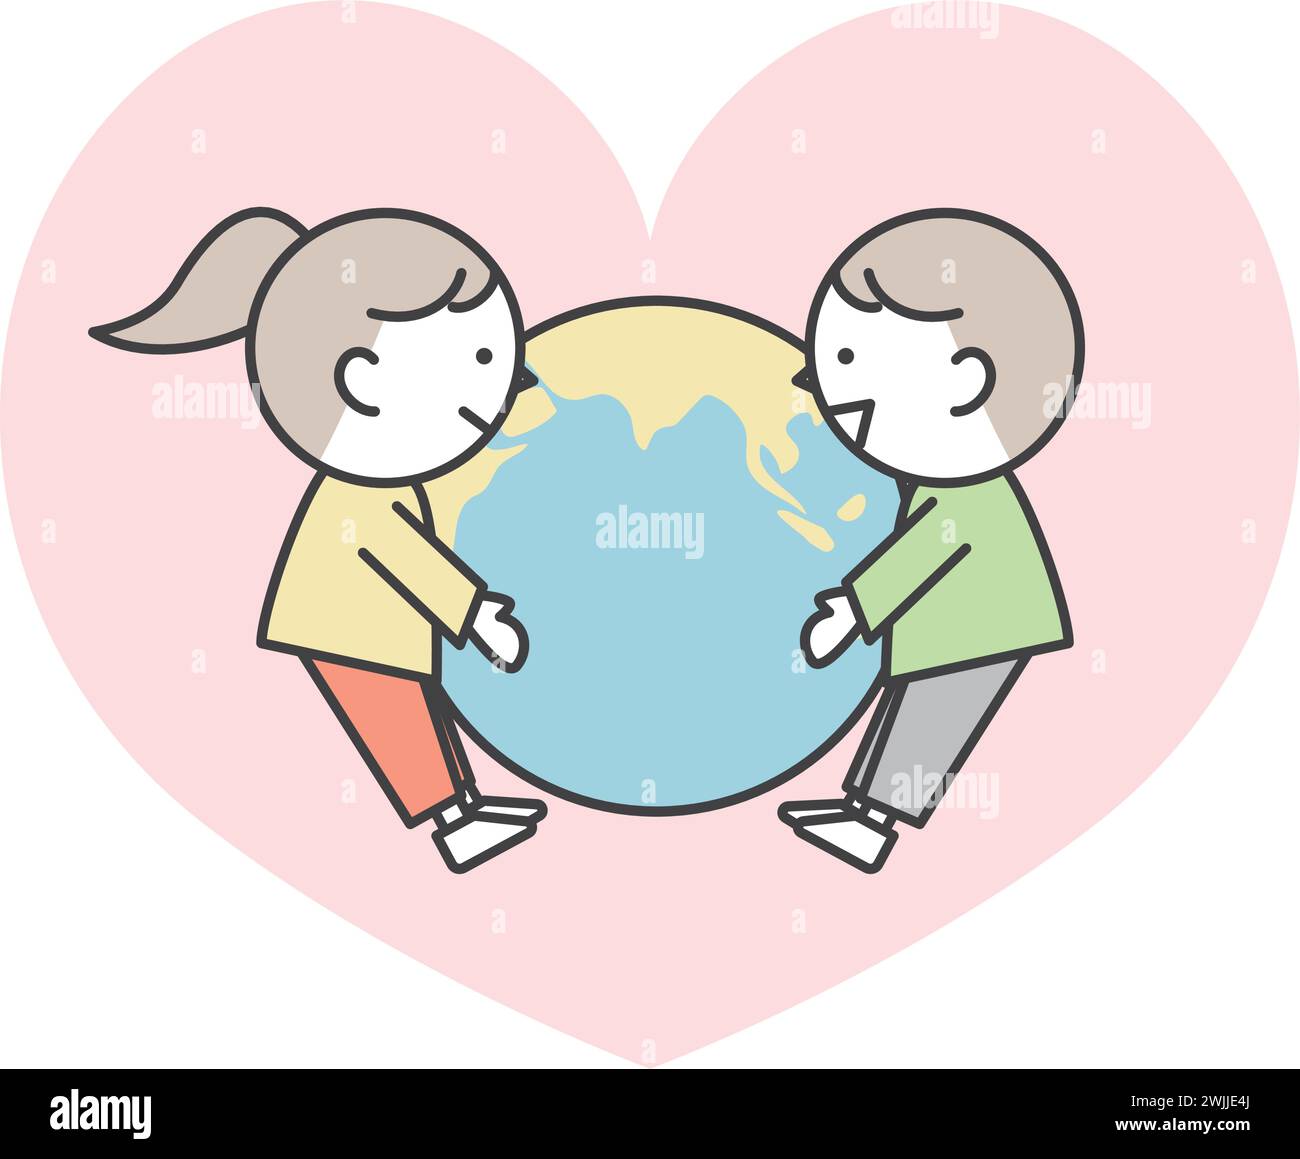 Boys and girls who love the earth. Image of global environmental protection. Simple and cute illustrations for children. Stock Vector